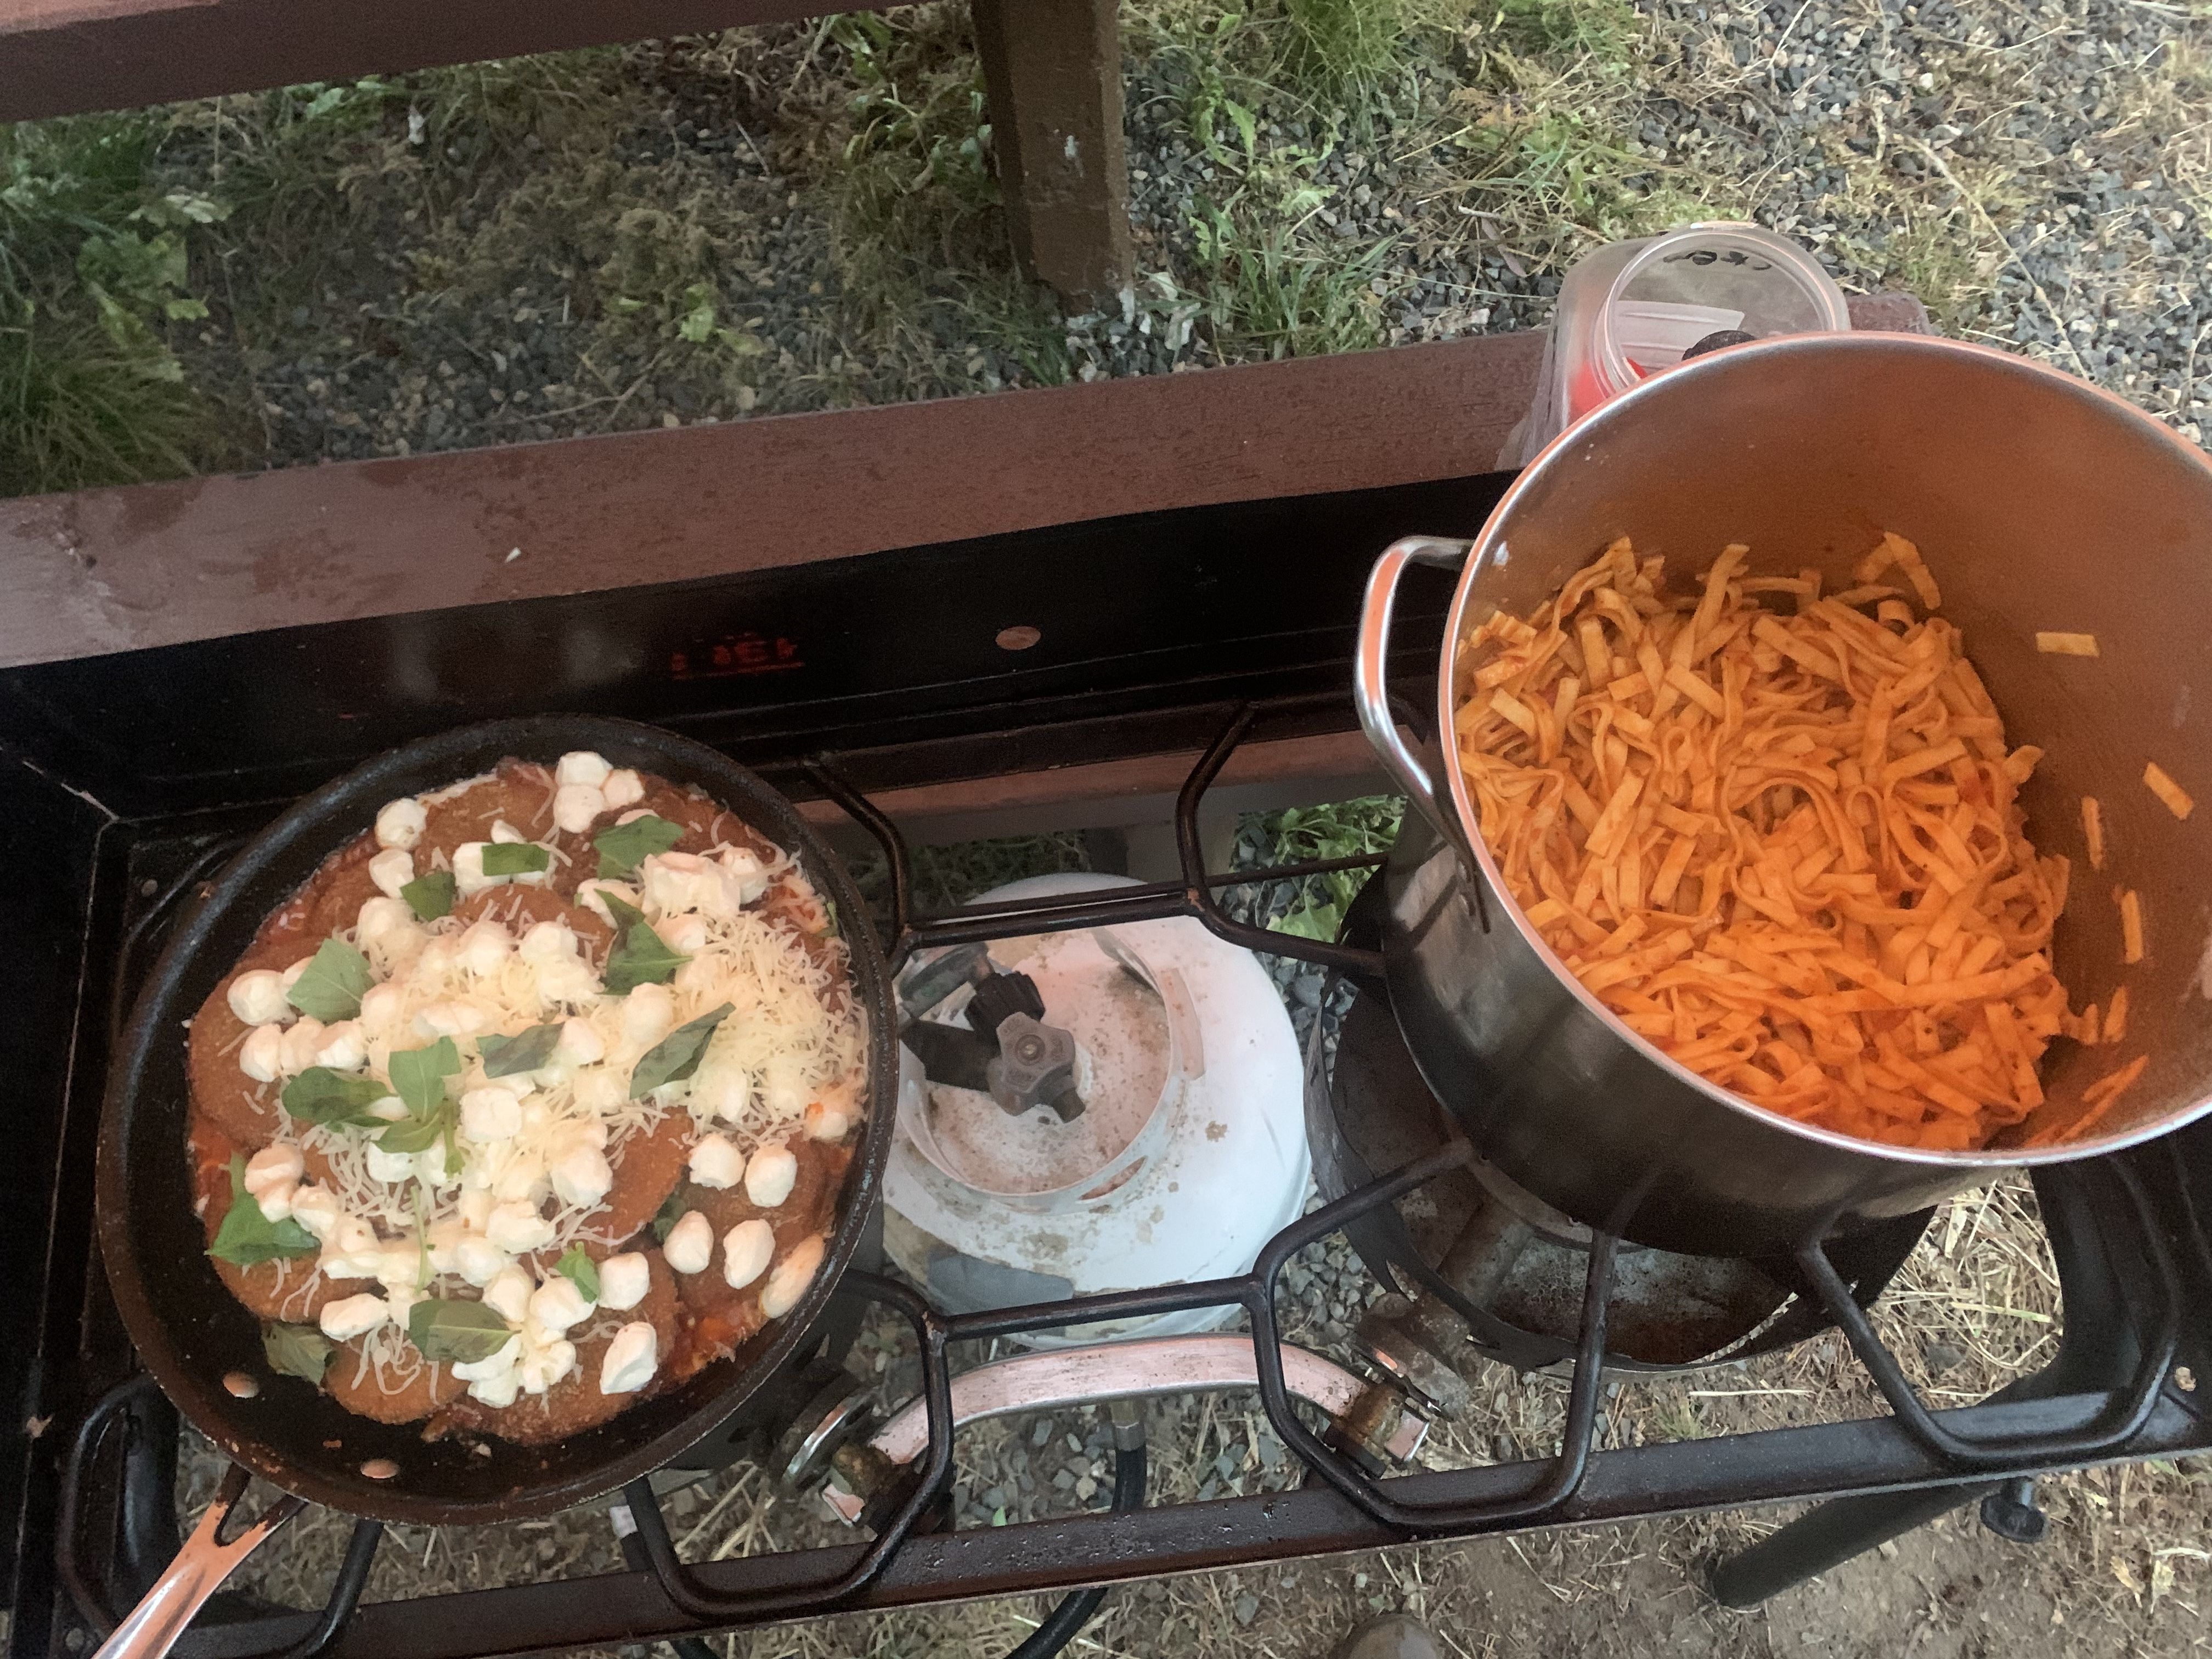 Pots of food sit on a propane stove